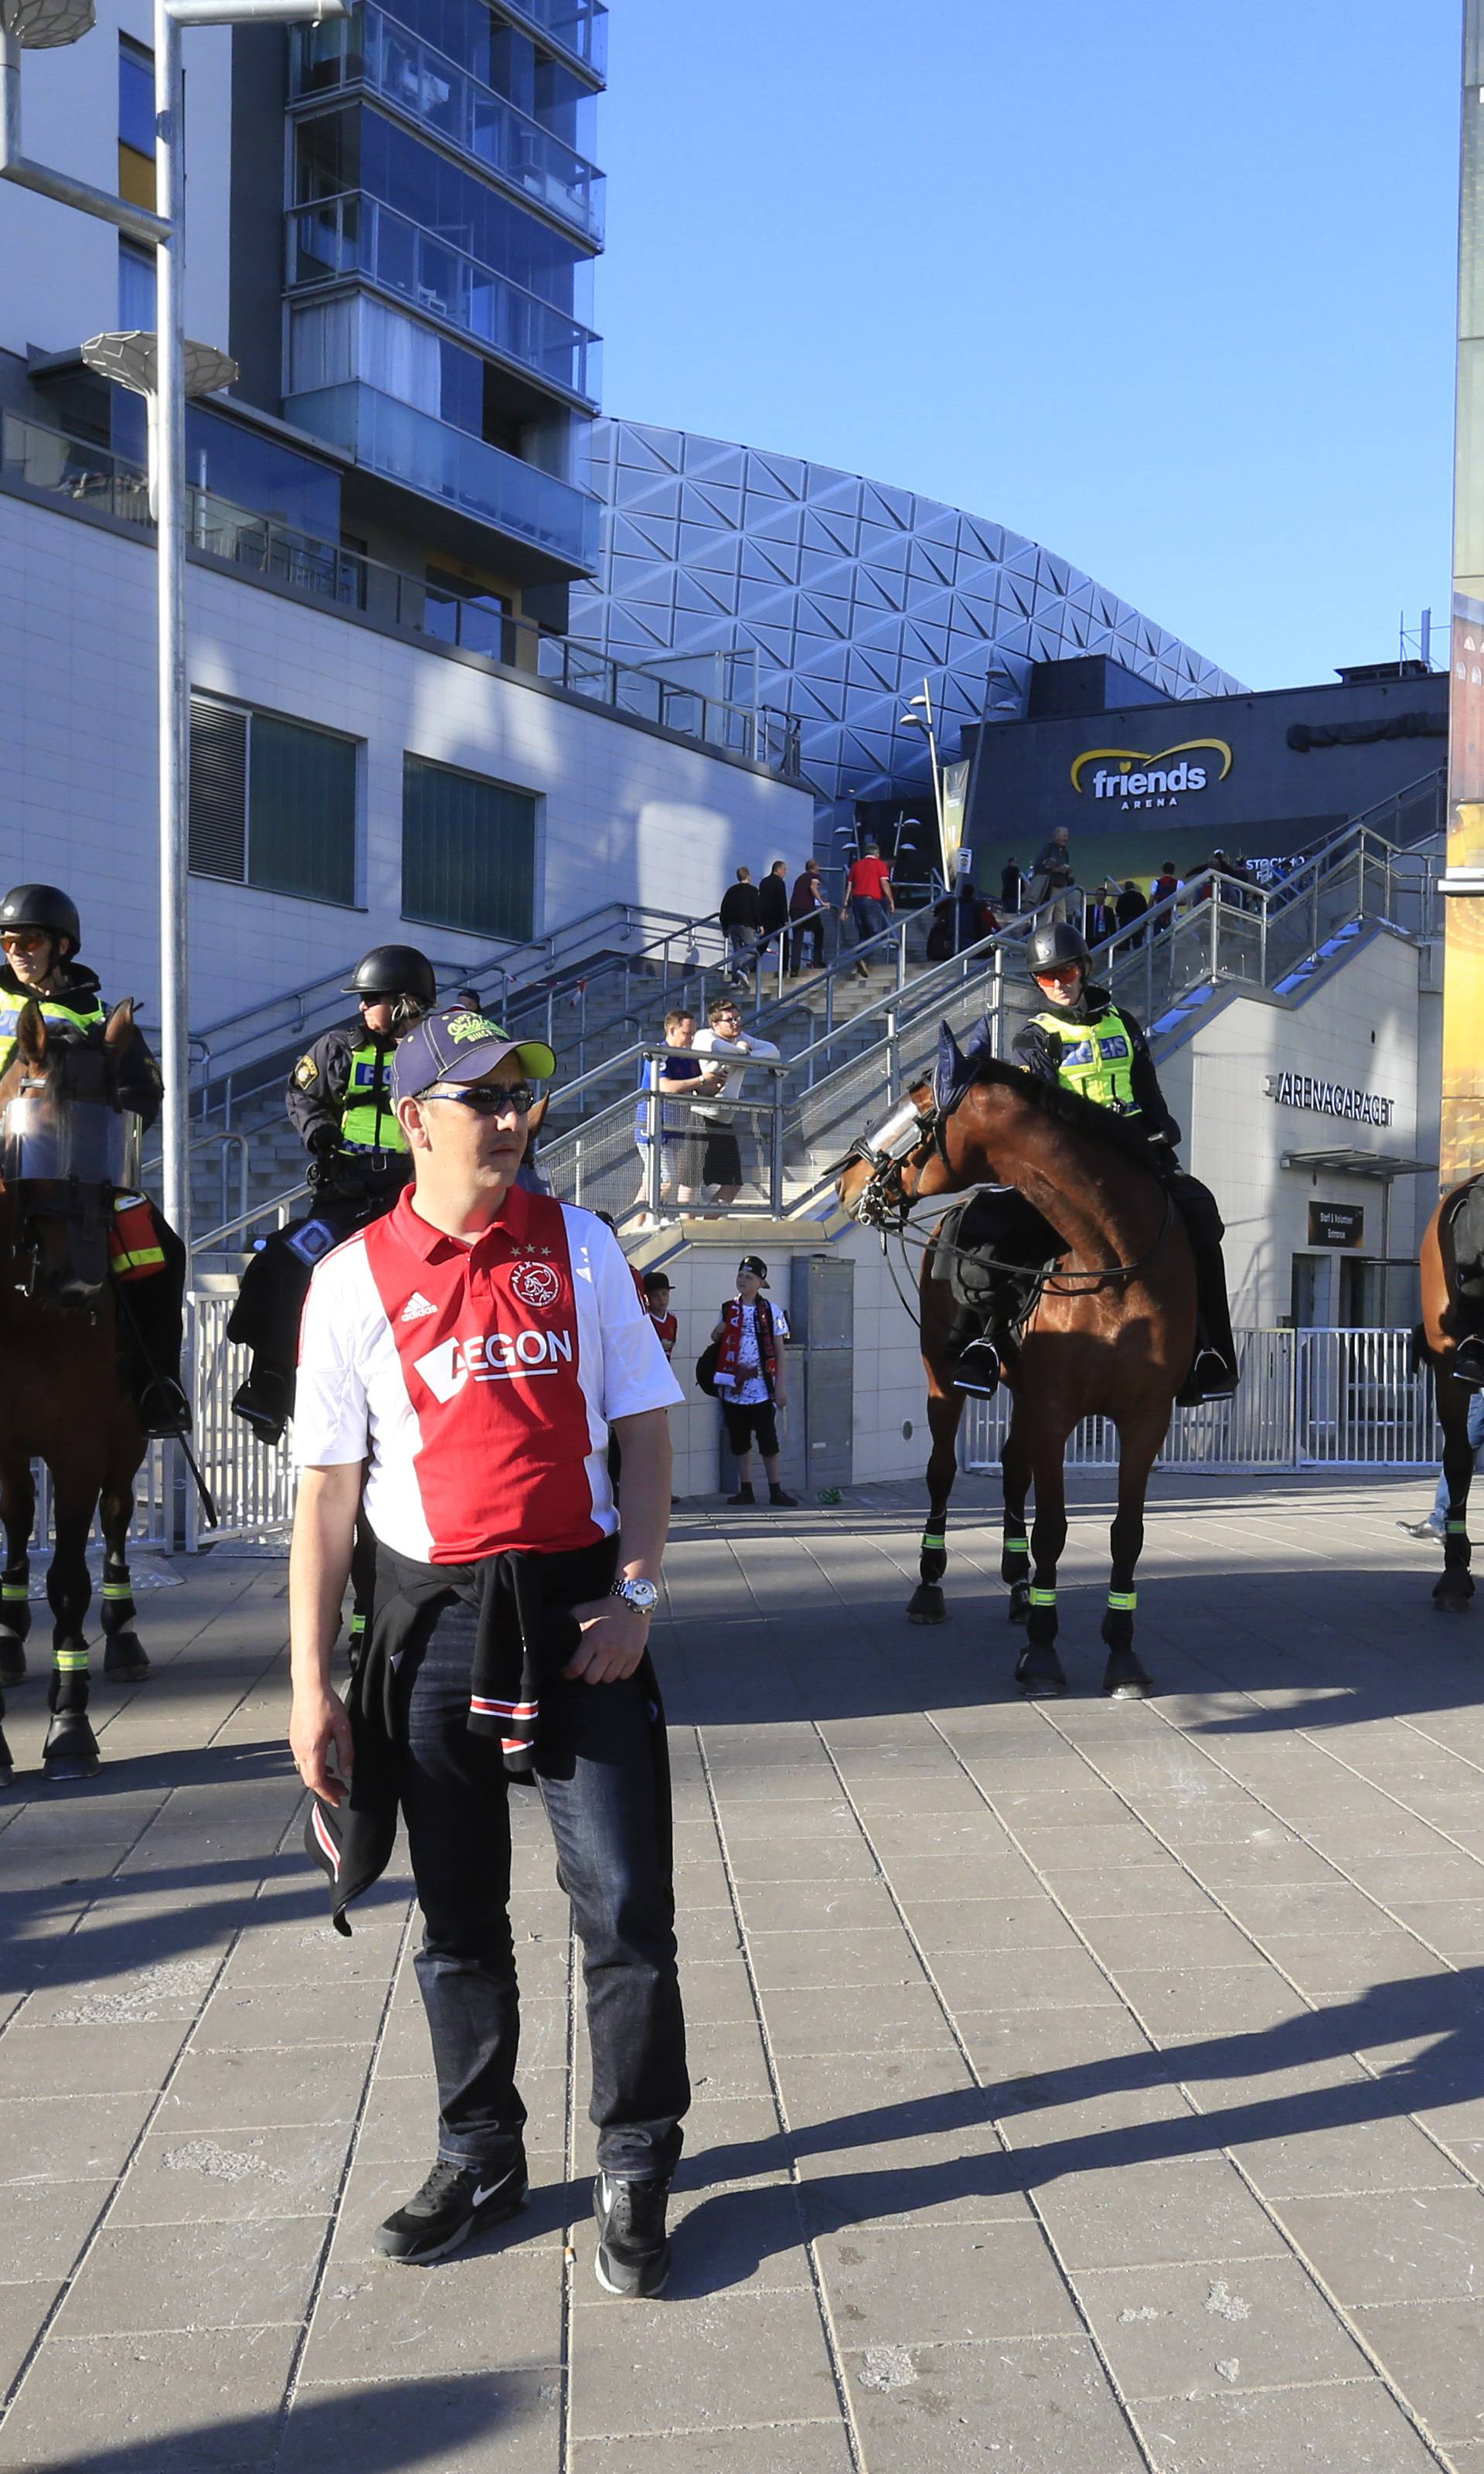 Mounted police and Ajax fans outside the stadium before the match